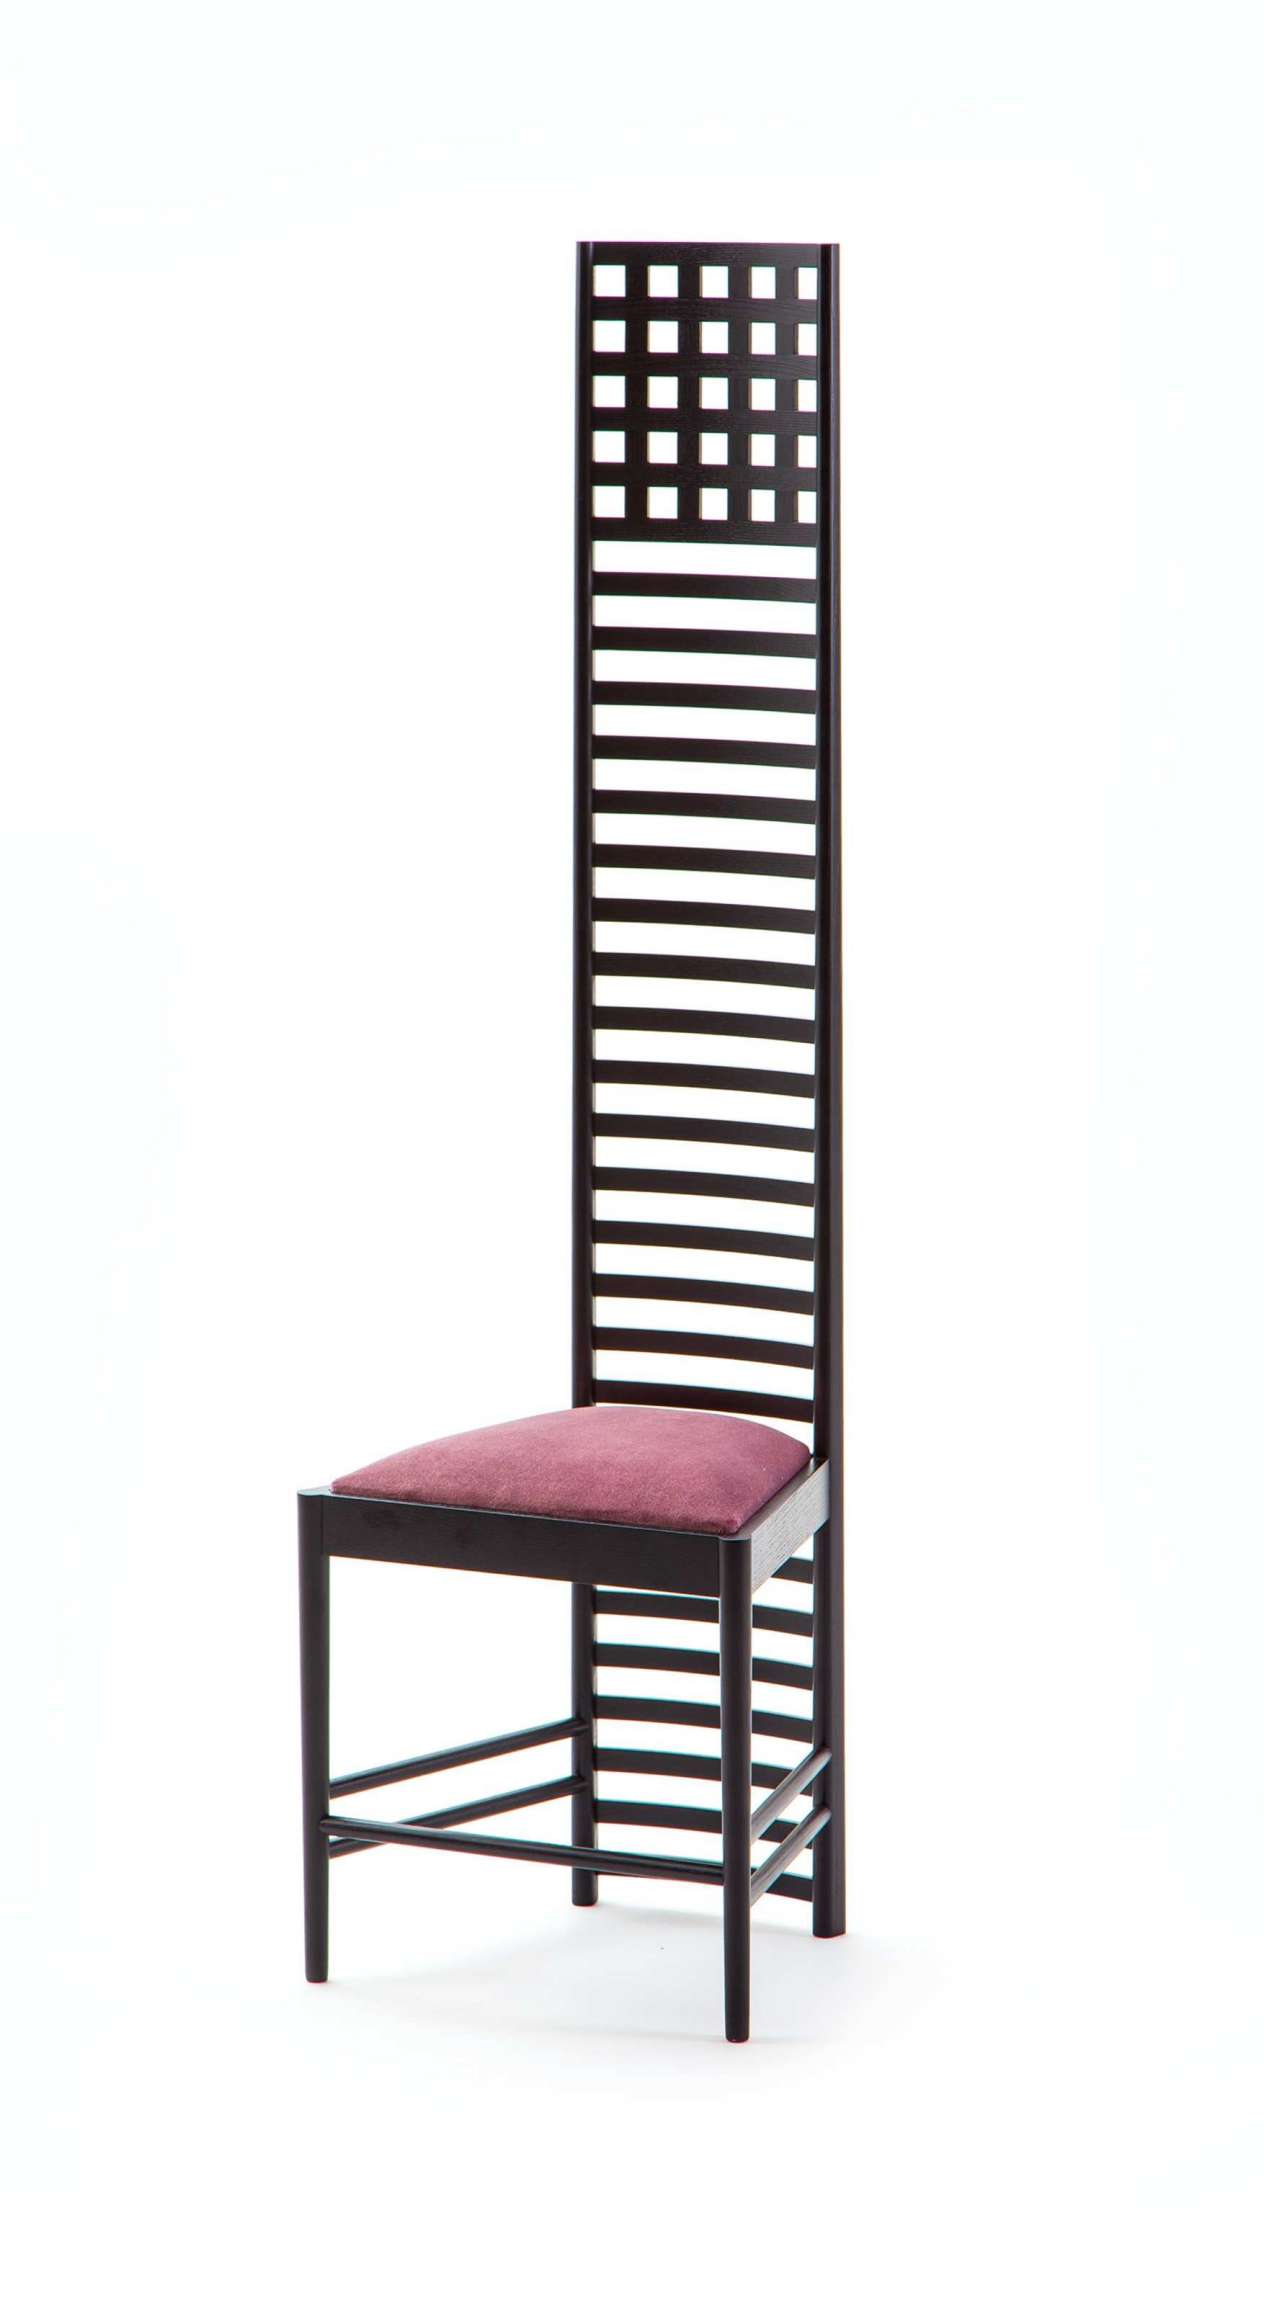 Hill House 1 Chair by Charles Rennie Mackintosh | Cassina